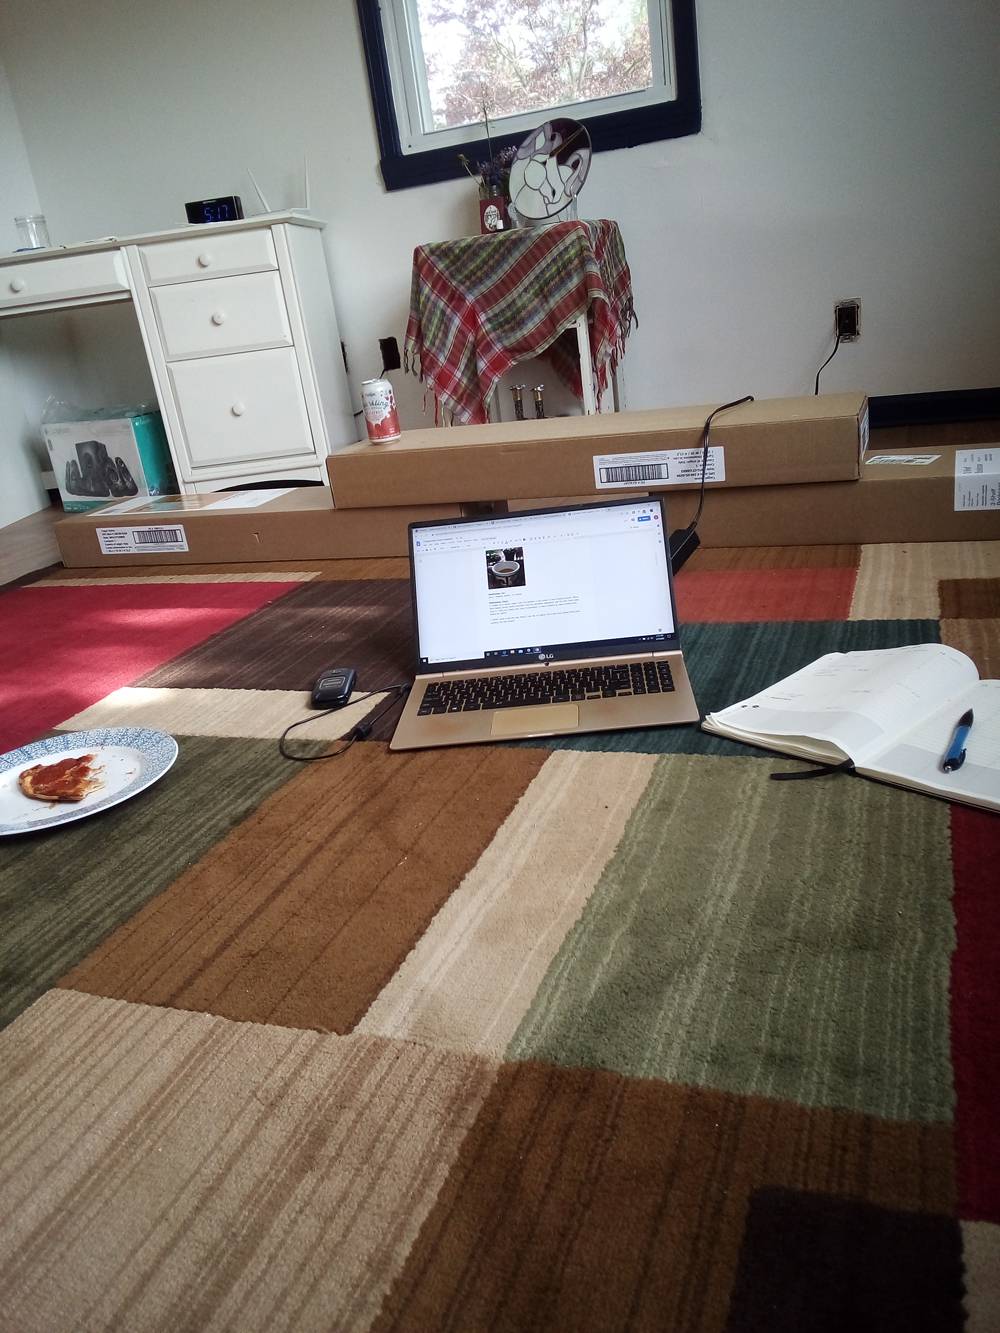 A mostly empty room with a colorful rug. On the floor is a plate with hald eaten slice of frozen pizza, a laptop and an open notebook with a pen on top of it. Photo by Zev Alexander. 